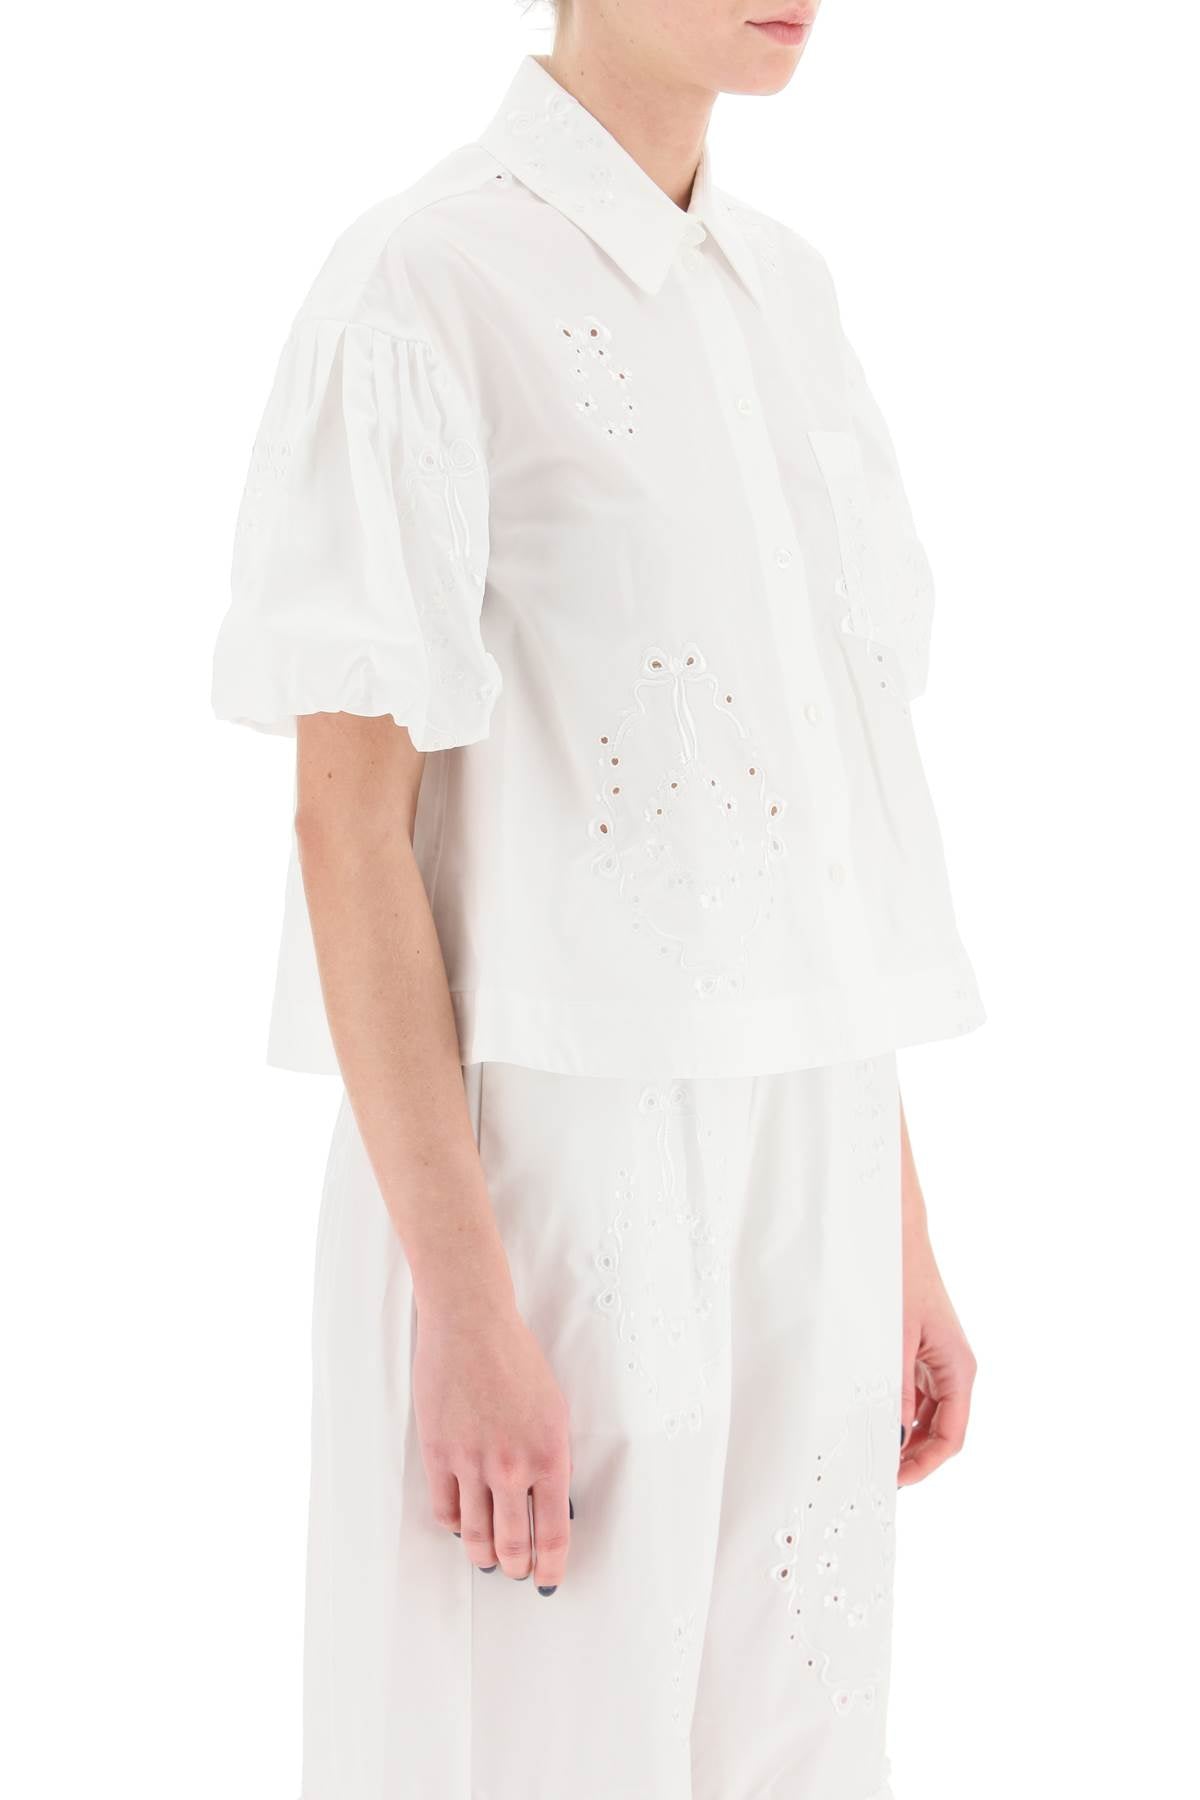 Simone rocha embroidered cropped shirt-1